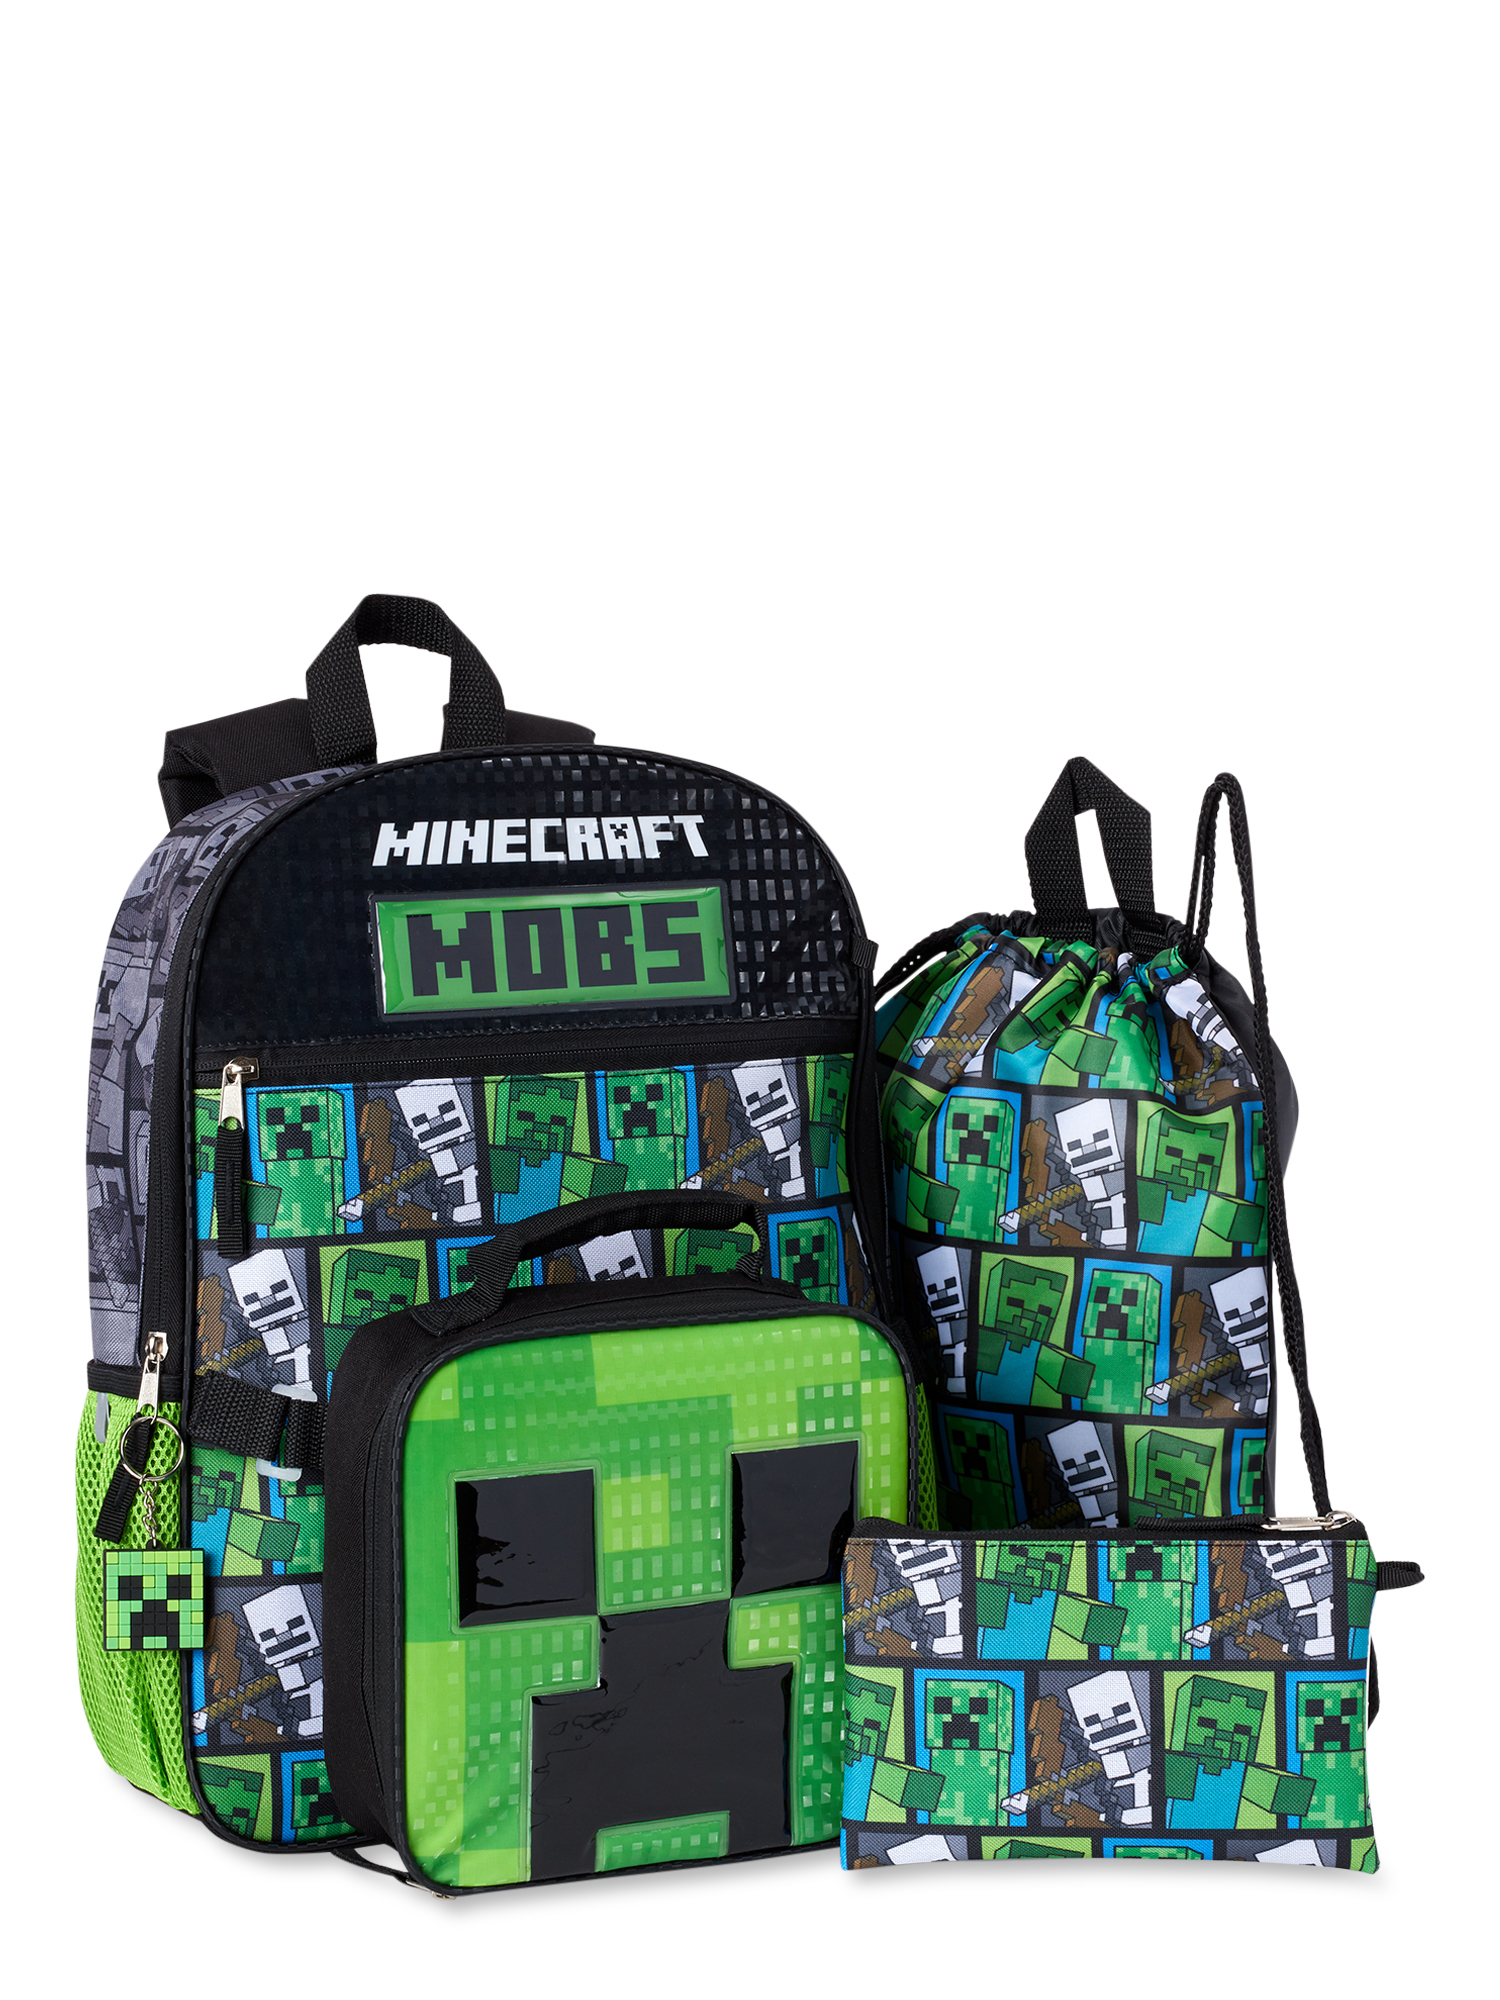 Minecraft Backpack Set, 5-Pieces - image 1 of 8